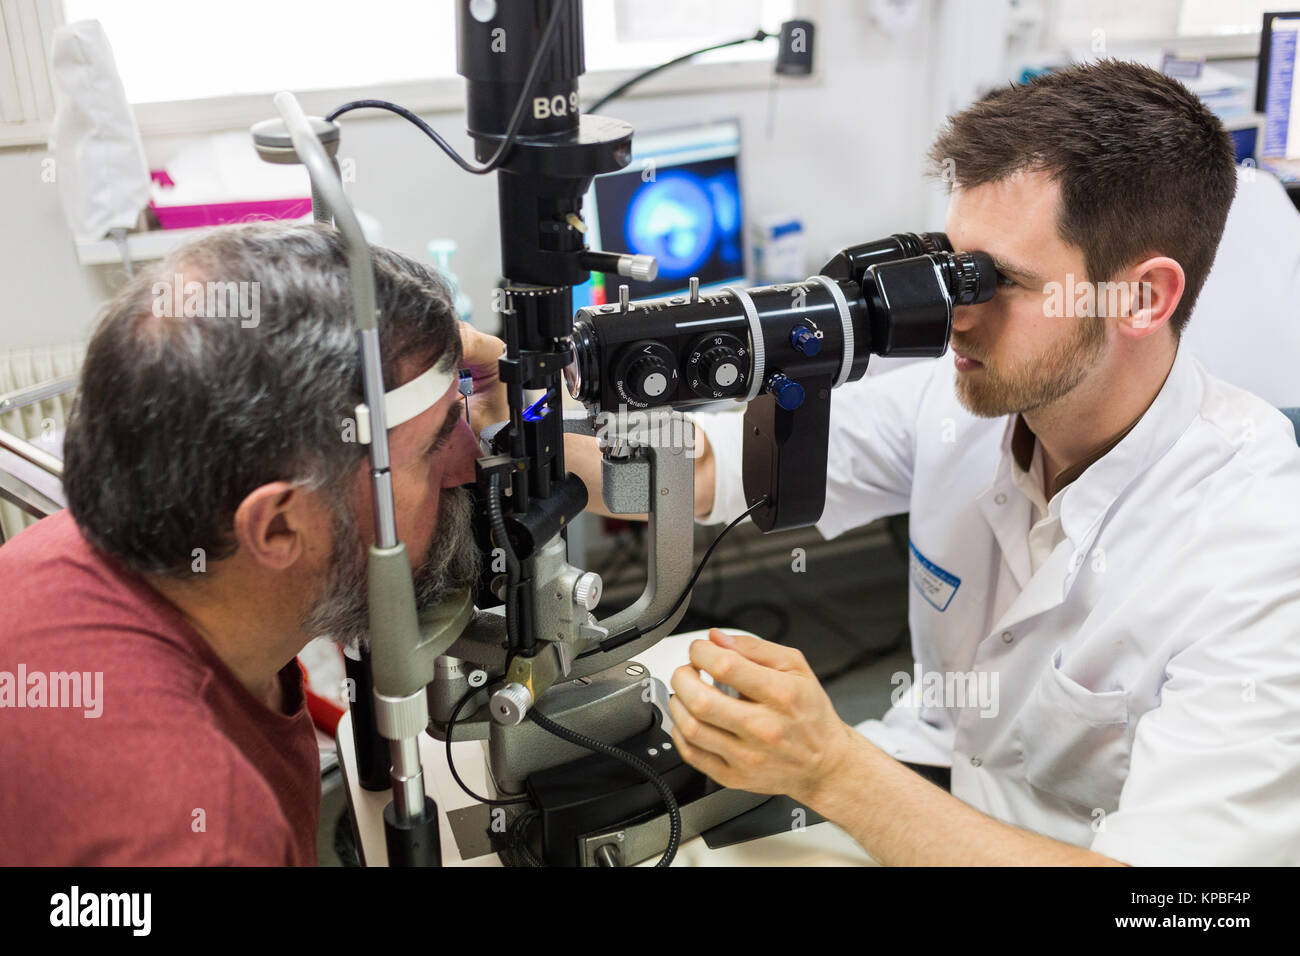 Consultation specialized in corneal pathology, Measurement of the intraocular pressure of a patient's eye using a tonometer, Screening for glaucoma, B Stock Photo